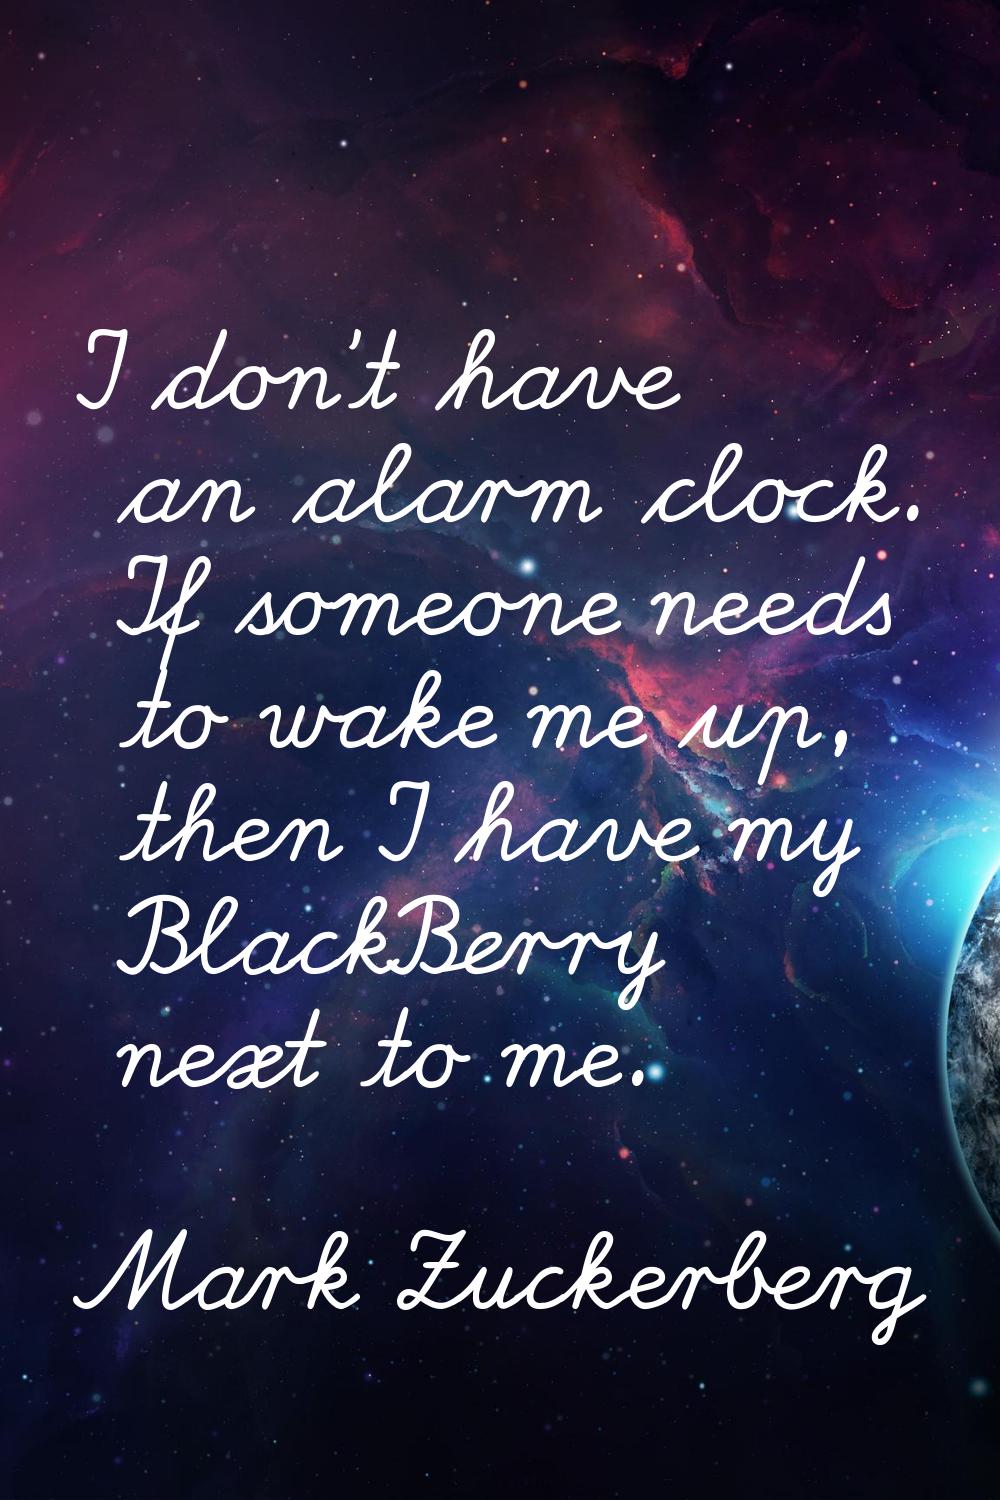 I don't have an alarm clock. If someone needs to wake me up, then I have my BlackBerry next to me.